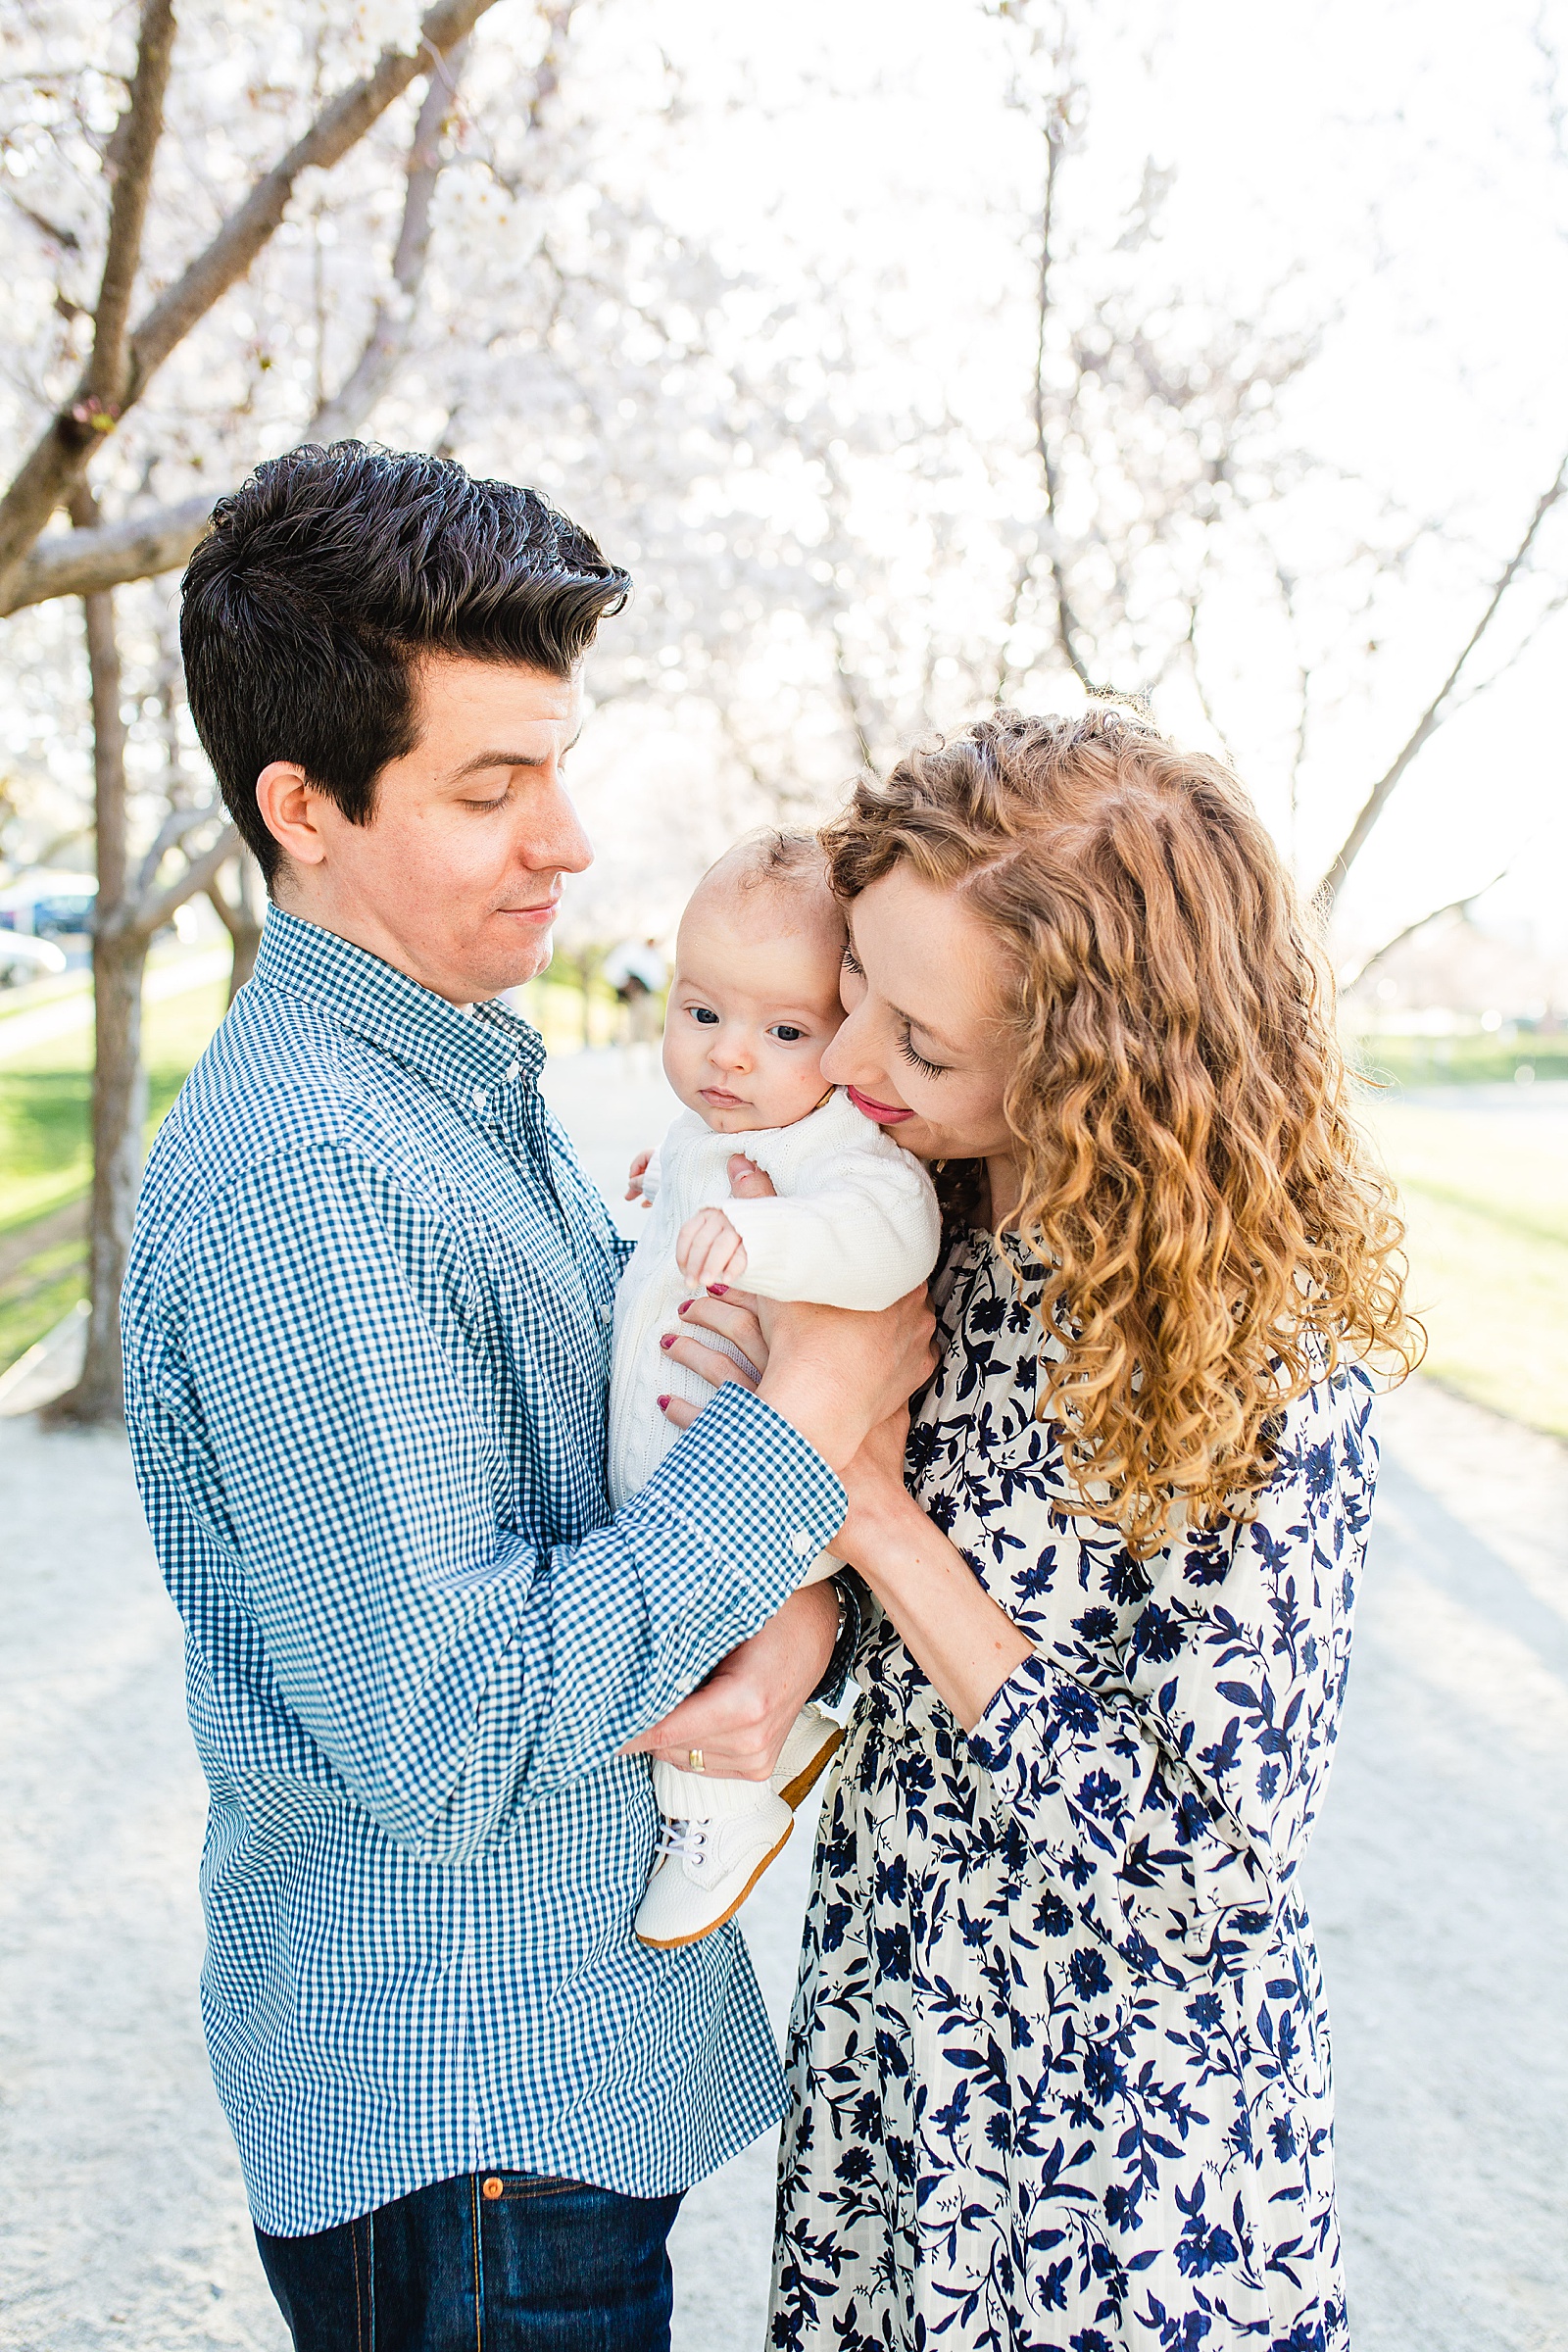 The Last Family | Utah State Capitol Blossoms